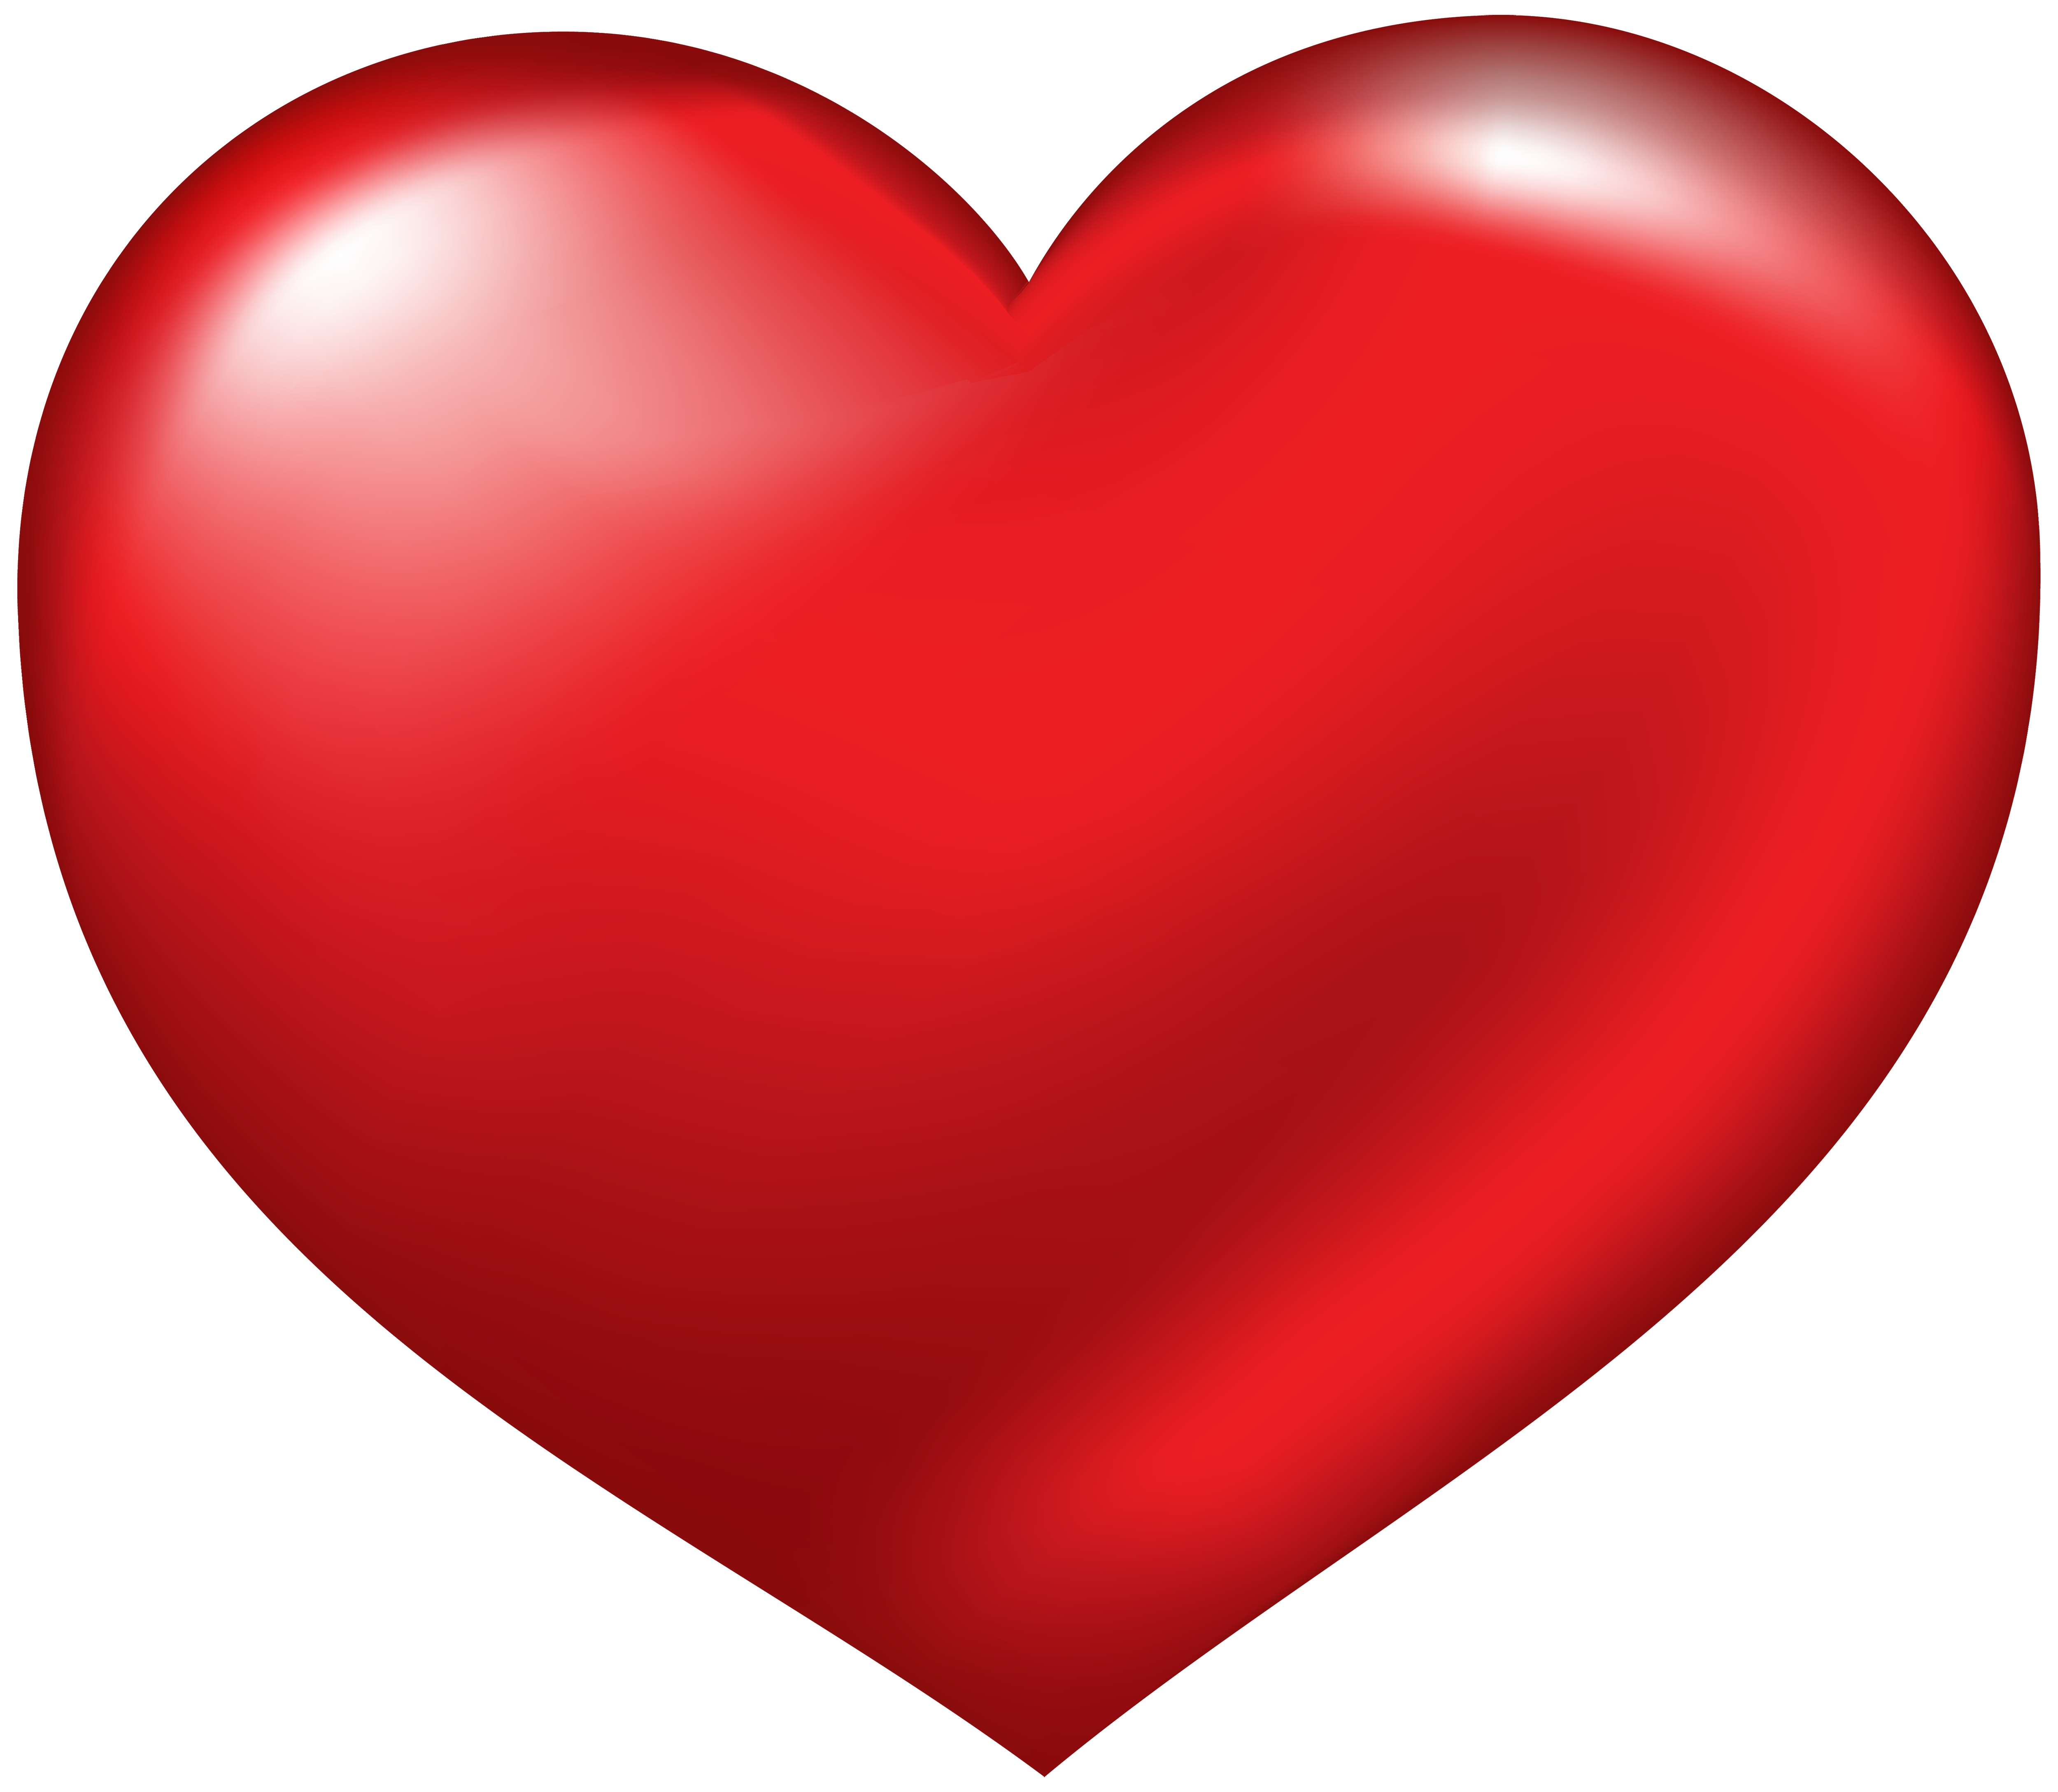 Red heart png.